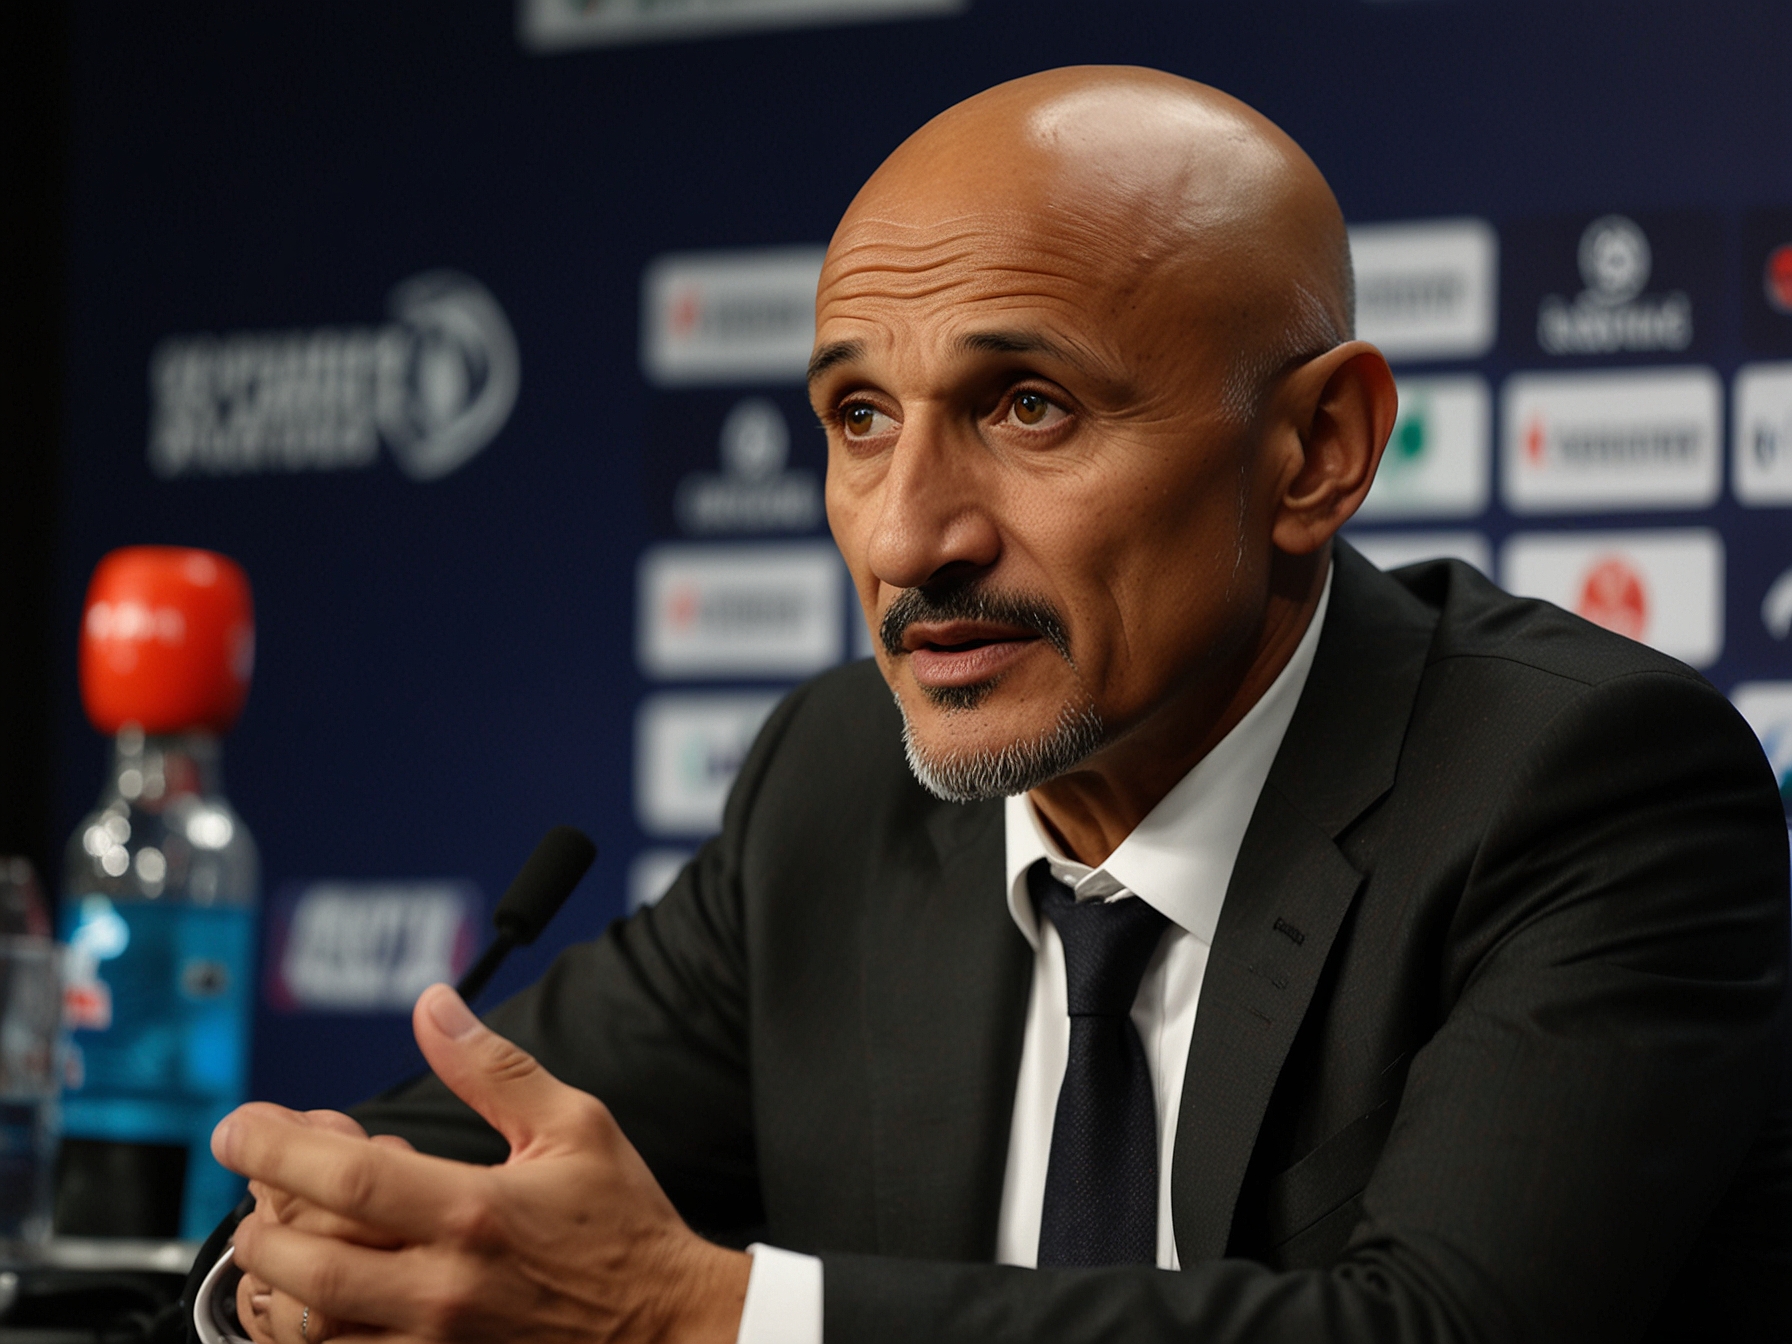 Luciano Spalletti discussing team strategies during a press conference.